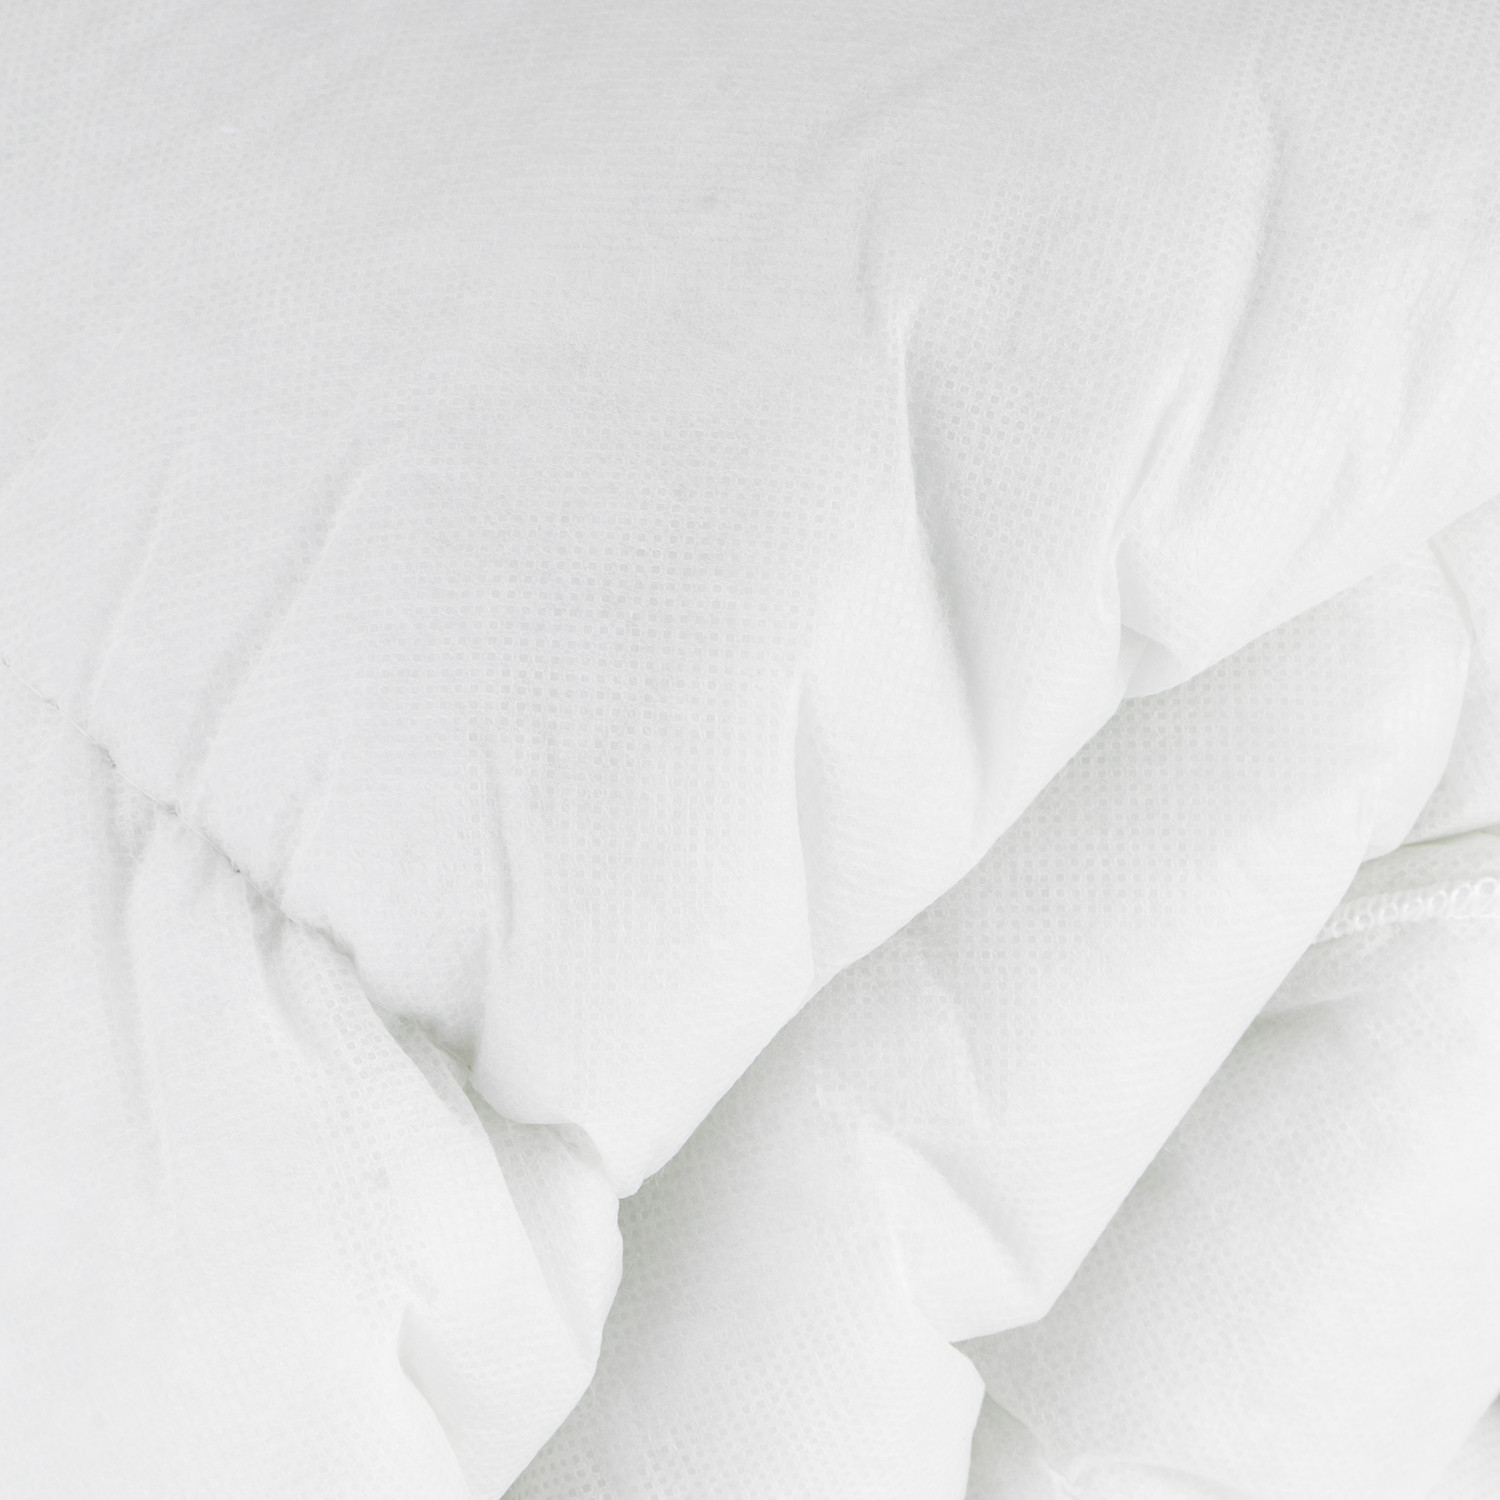 My Home Double White 10.5 Tog Duvet Cover Image 2